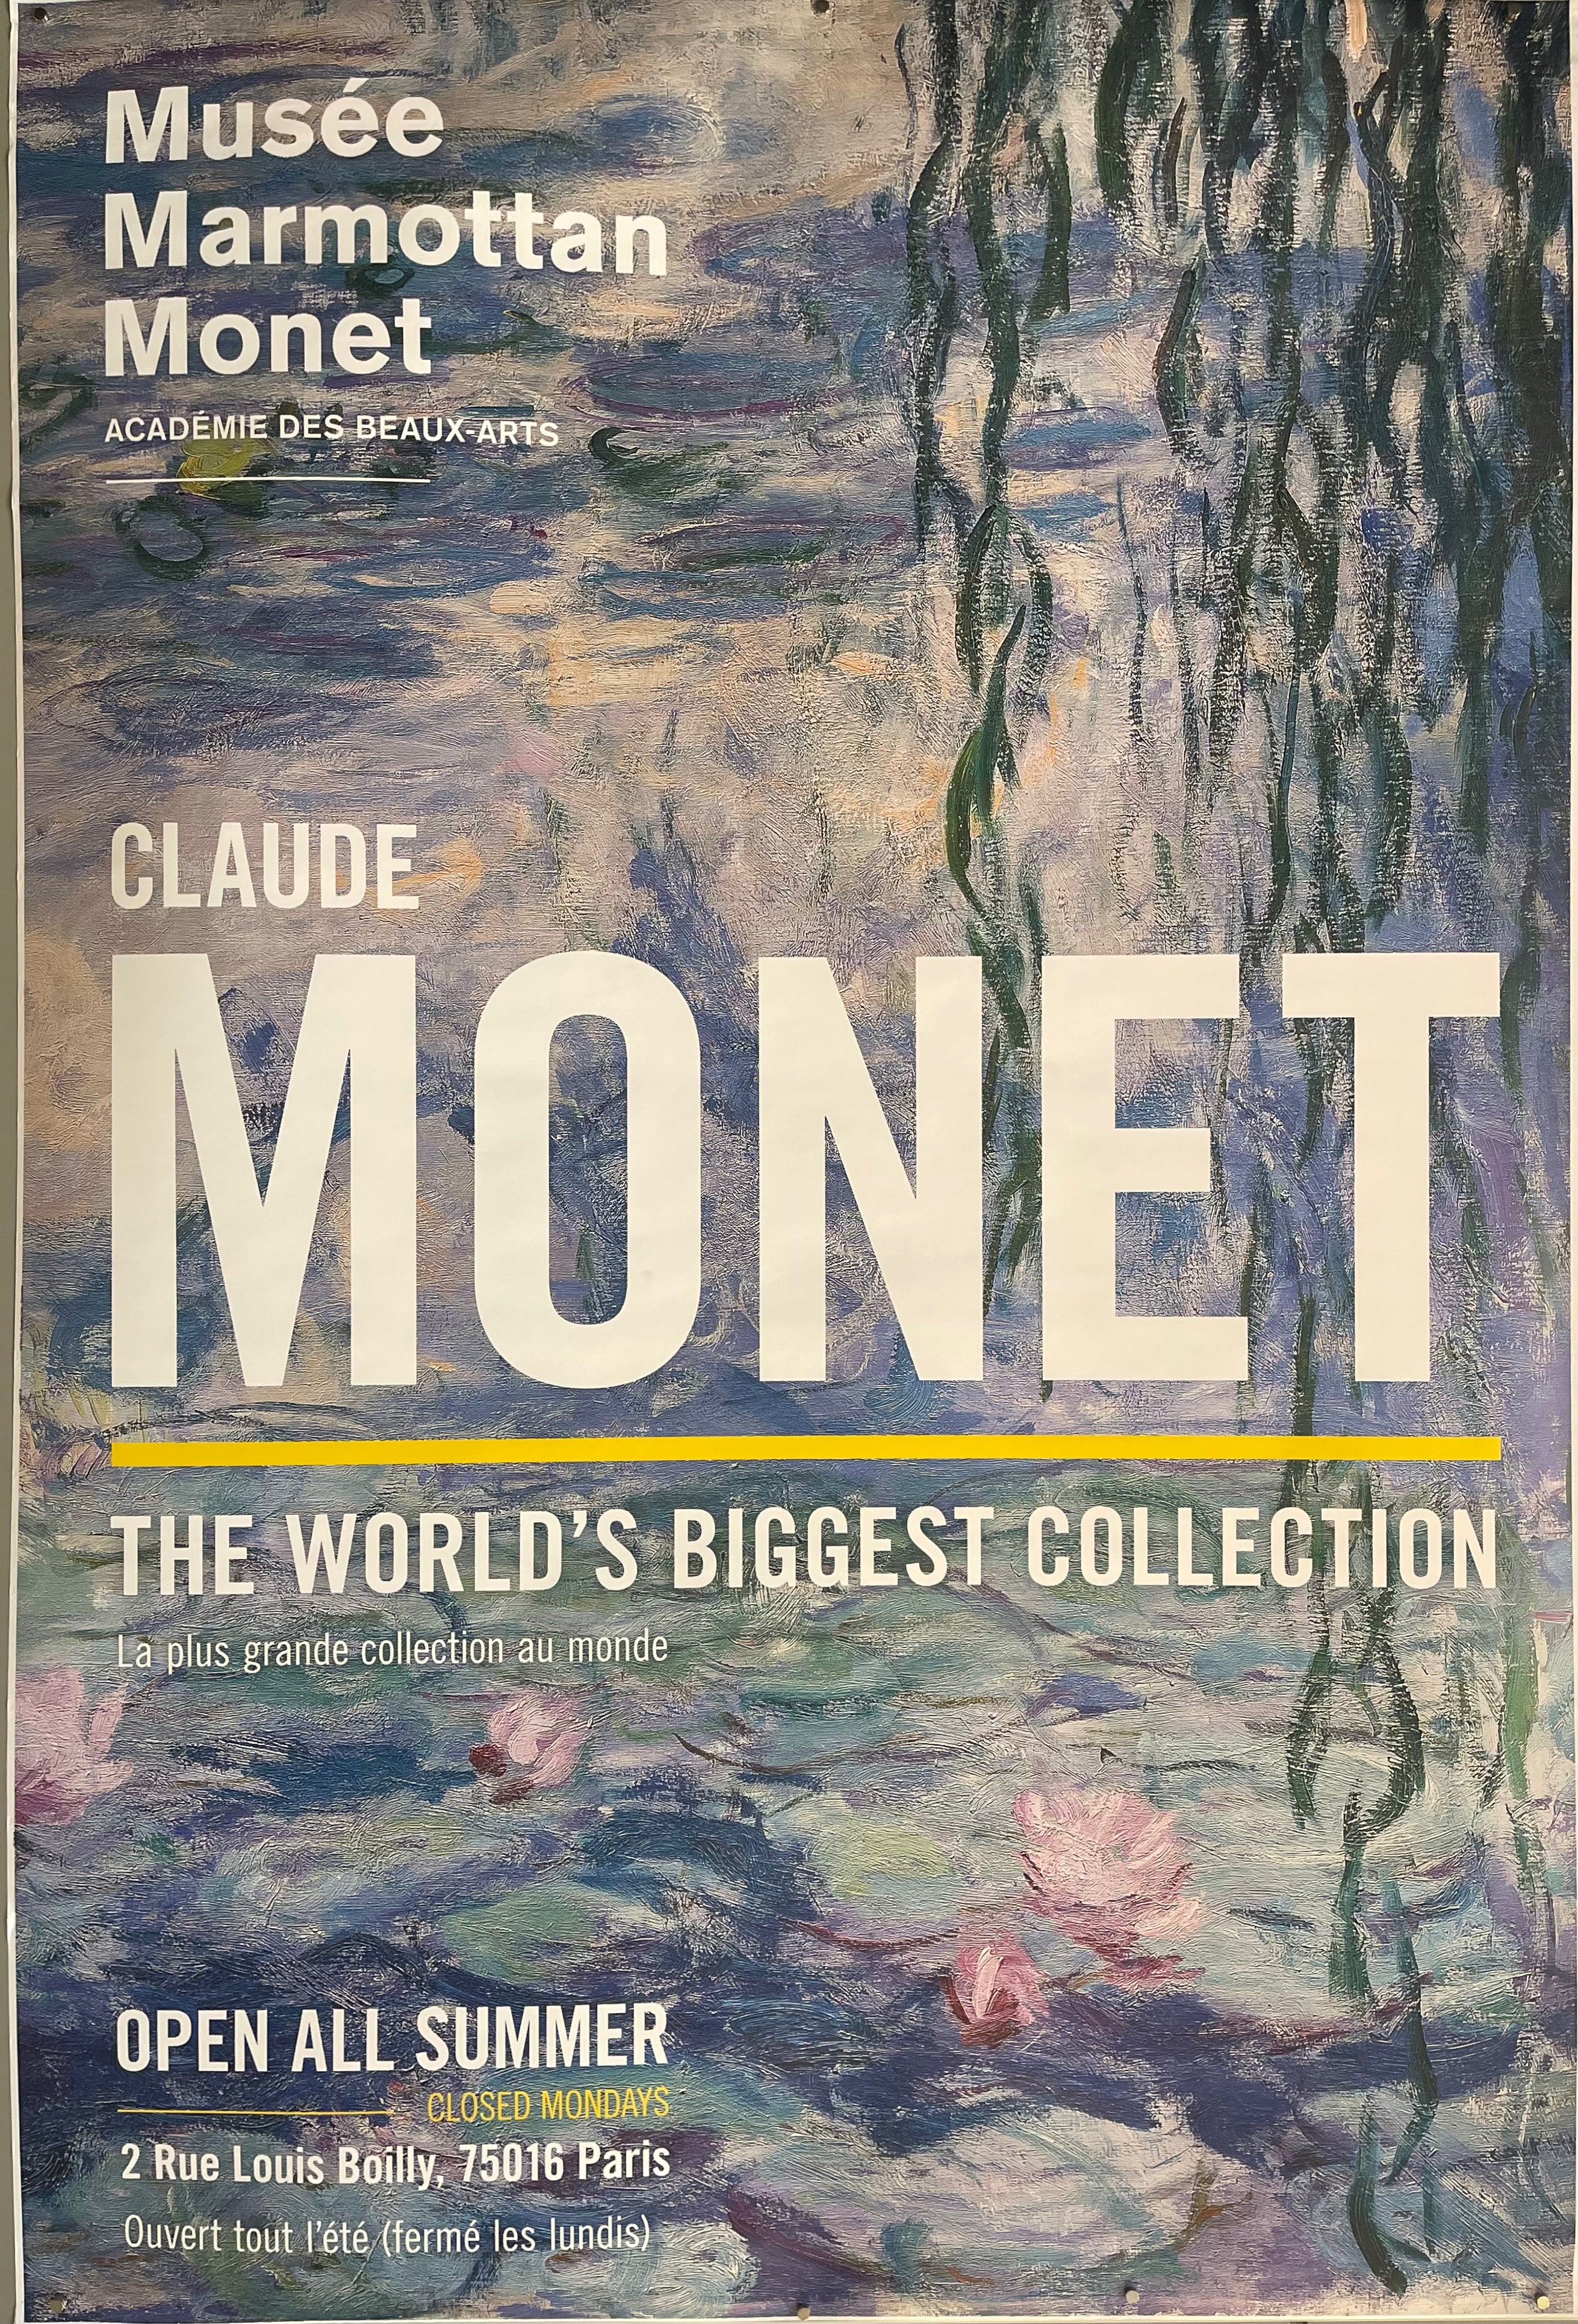 70x47 french museum poster for claude monet painting collection featuring exhibition information with monet painting in background 